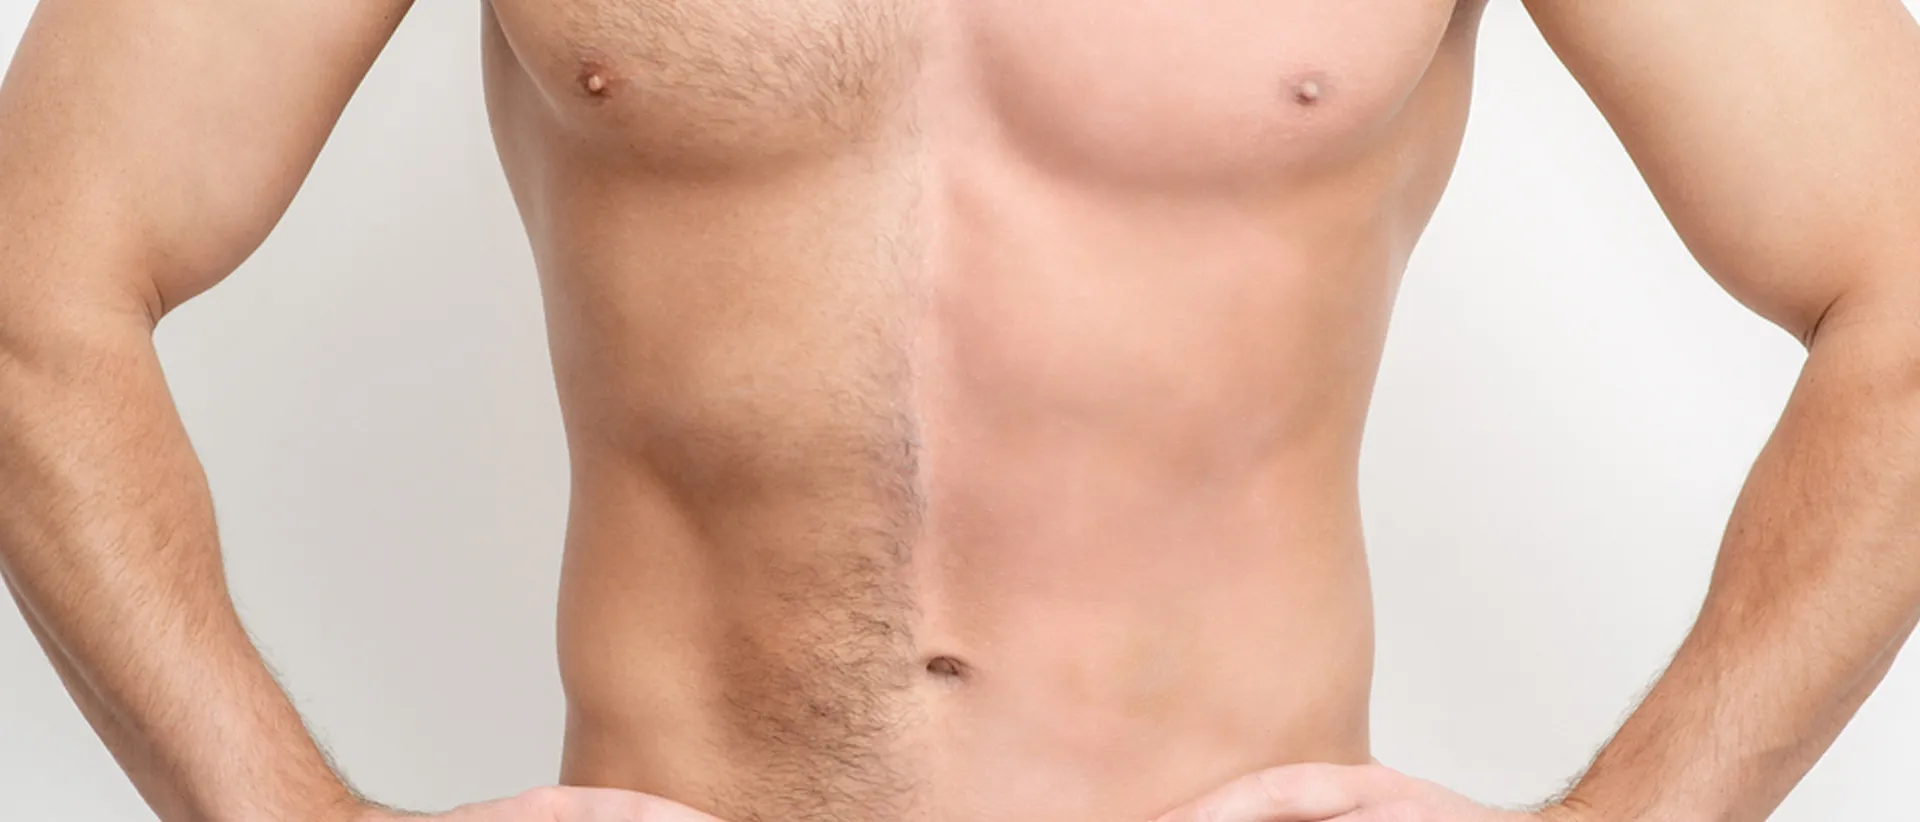 Sketching a demarcation on a man's chest to show the effectiveness of full body laser hair removal treatment